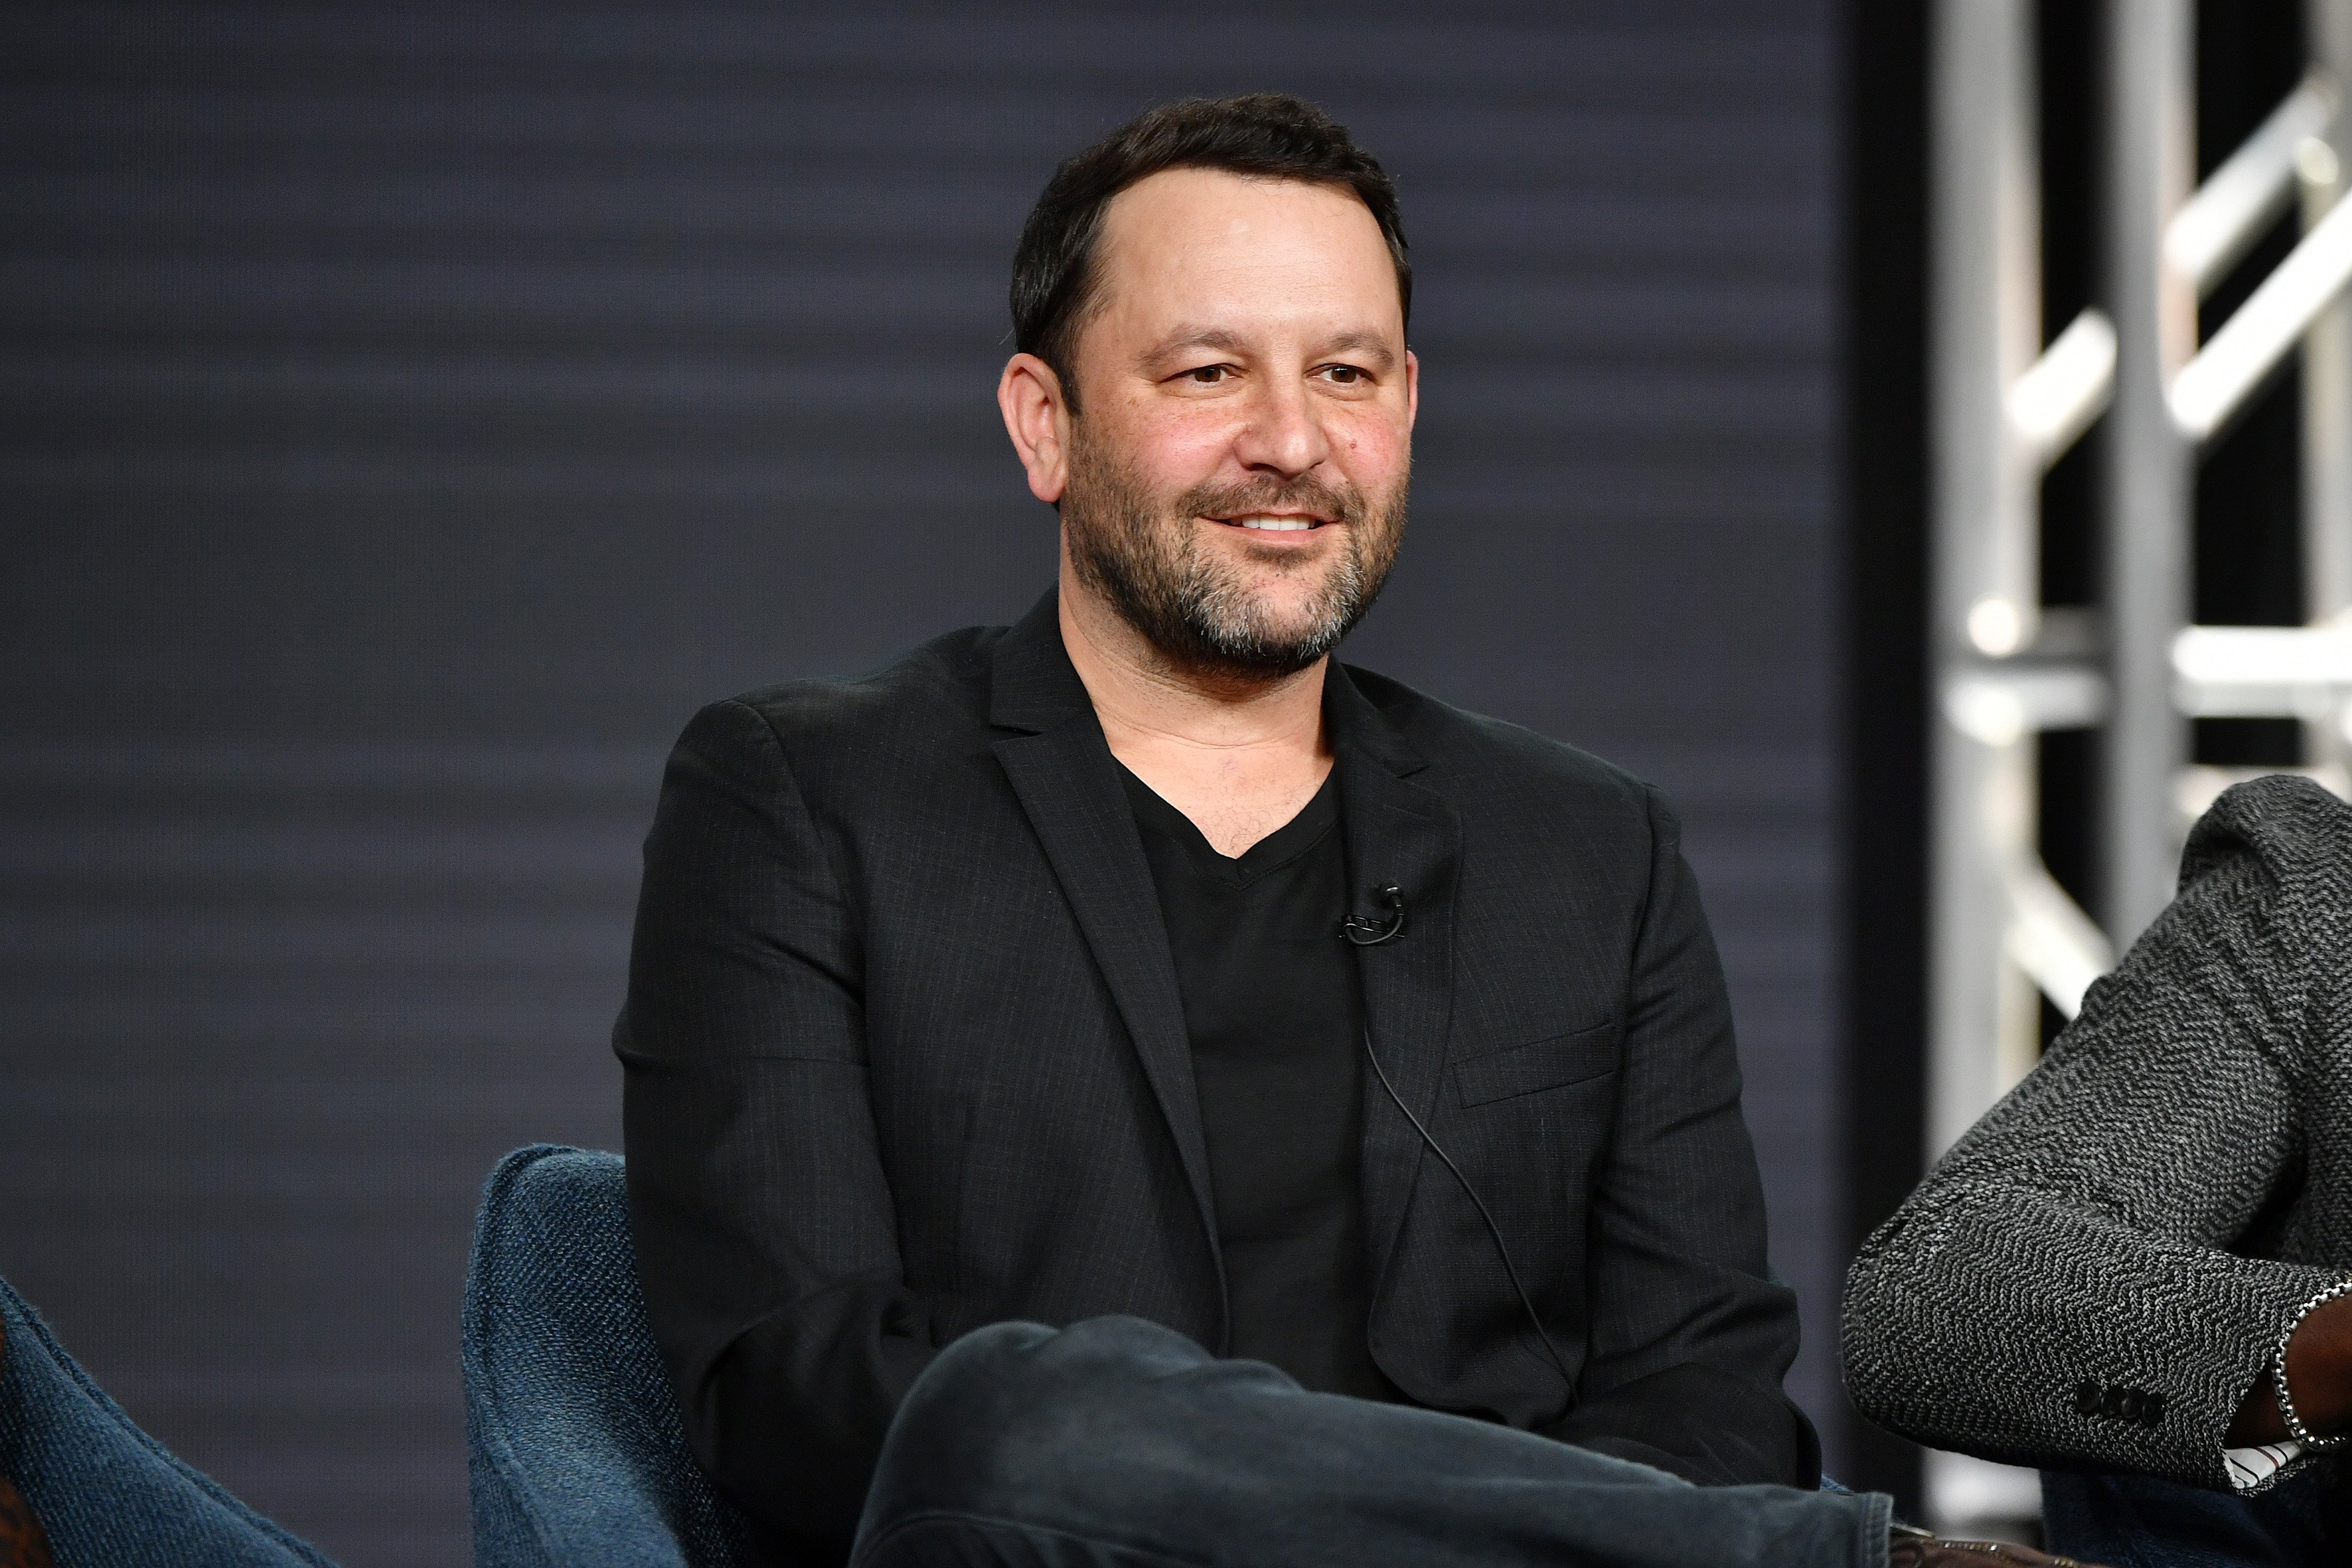 Dan Fogelman, who created 'This Is Us,' which is ending before season 7, wears a black blazer over a black shirt and dark jeans.